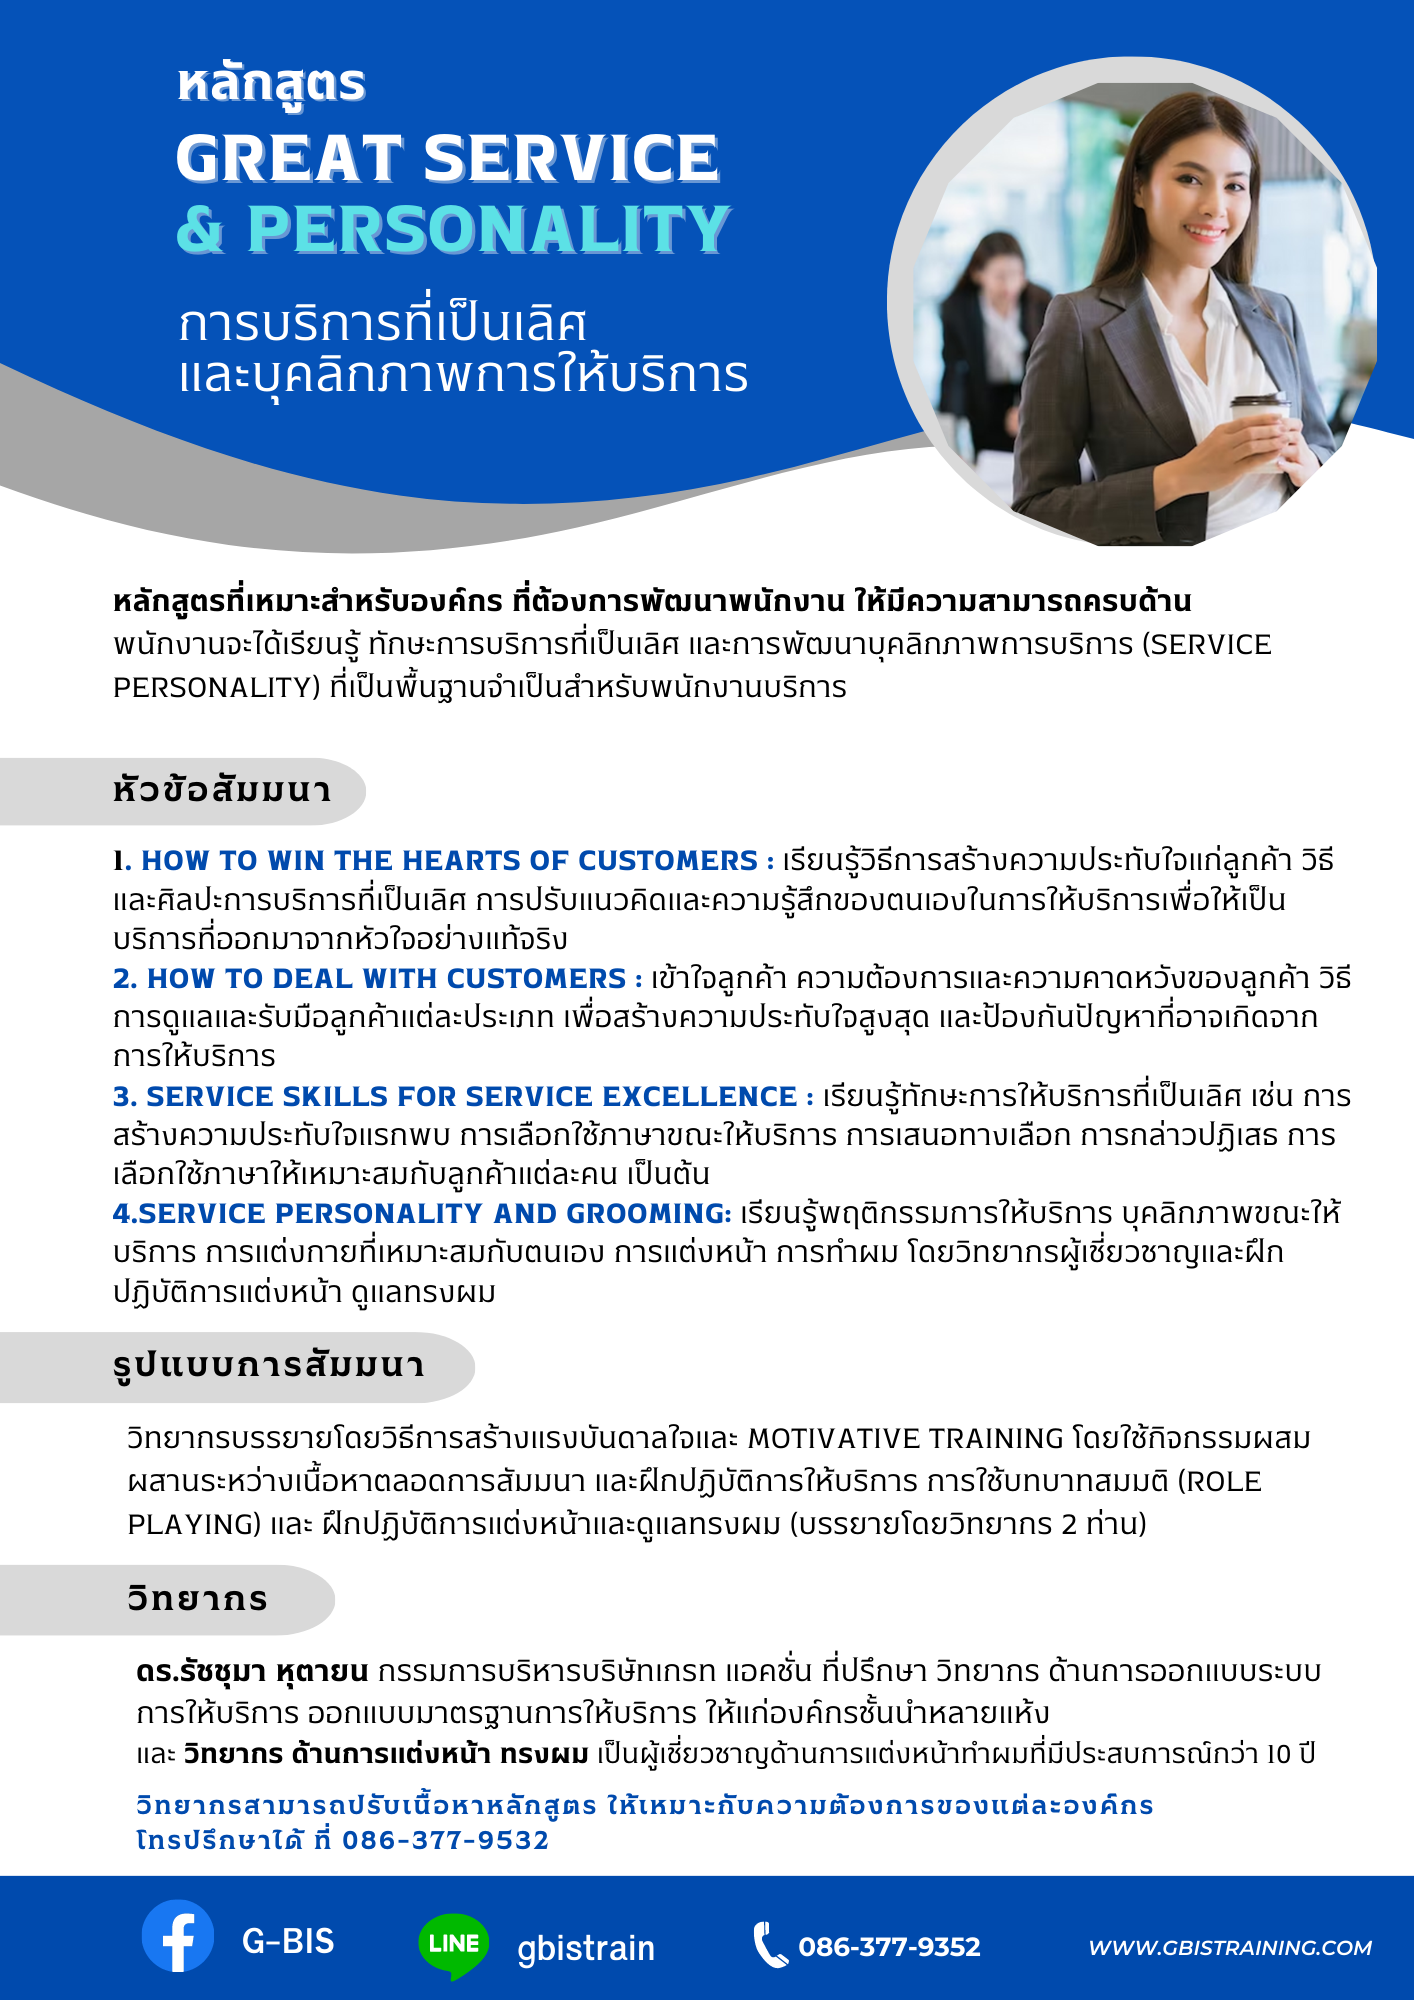 Great Service & Personality  A4 เนื้อใน.png (724 KB)